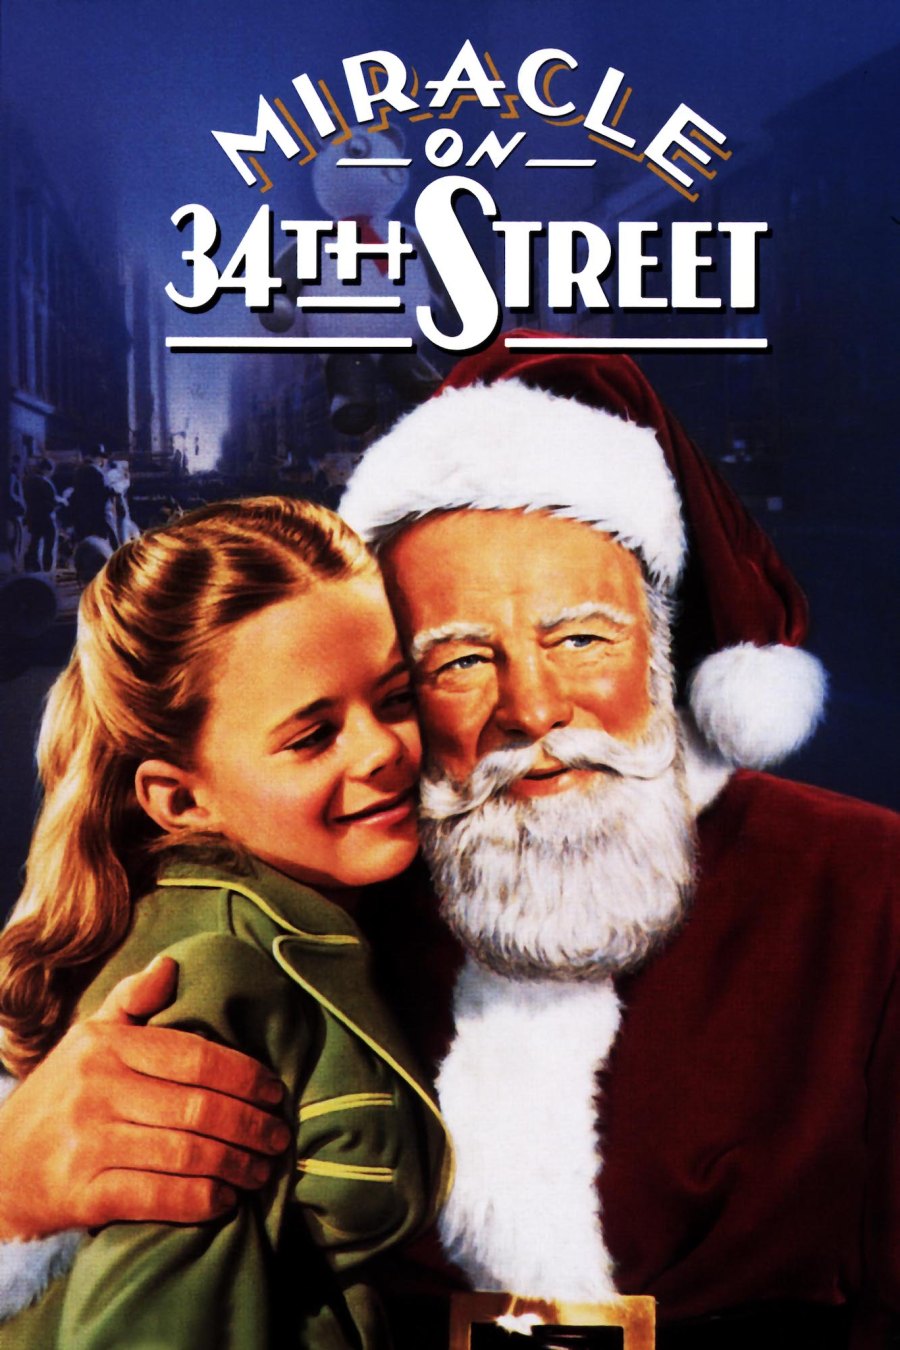 Best Holiday Movies to Snuggle Up and Watch on the Couch